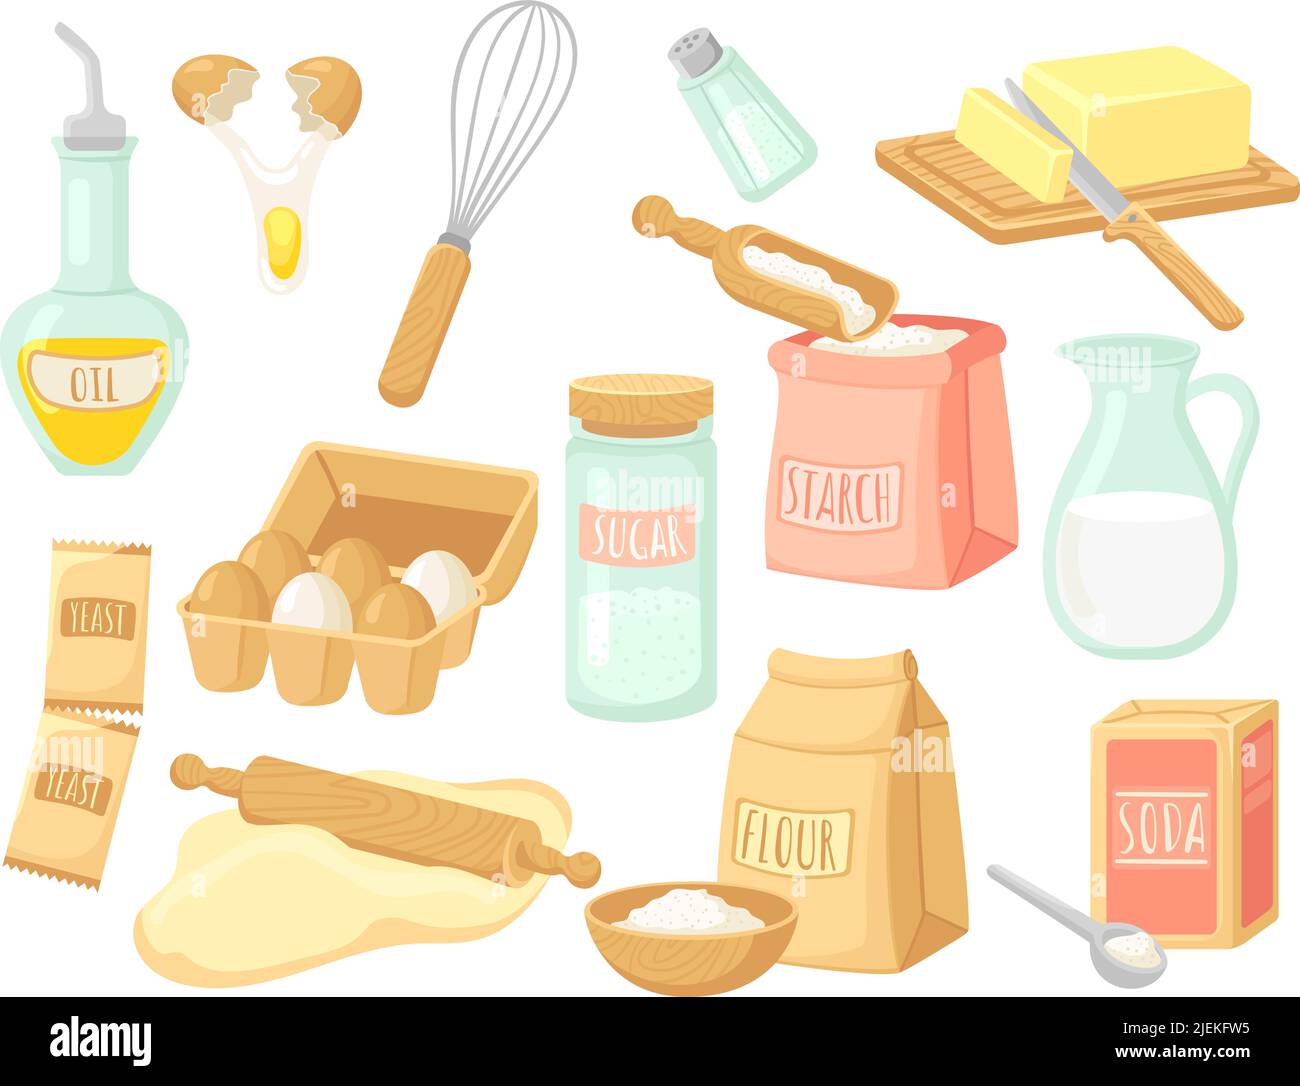 Baking ingredients food and cooking kitchen items Vector Image